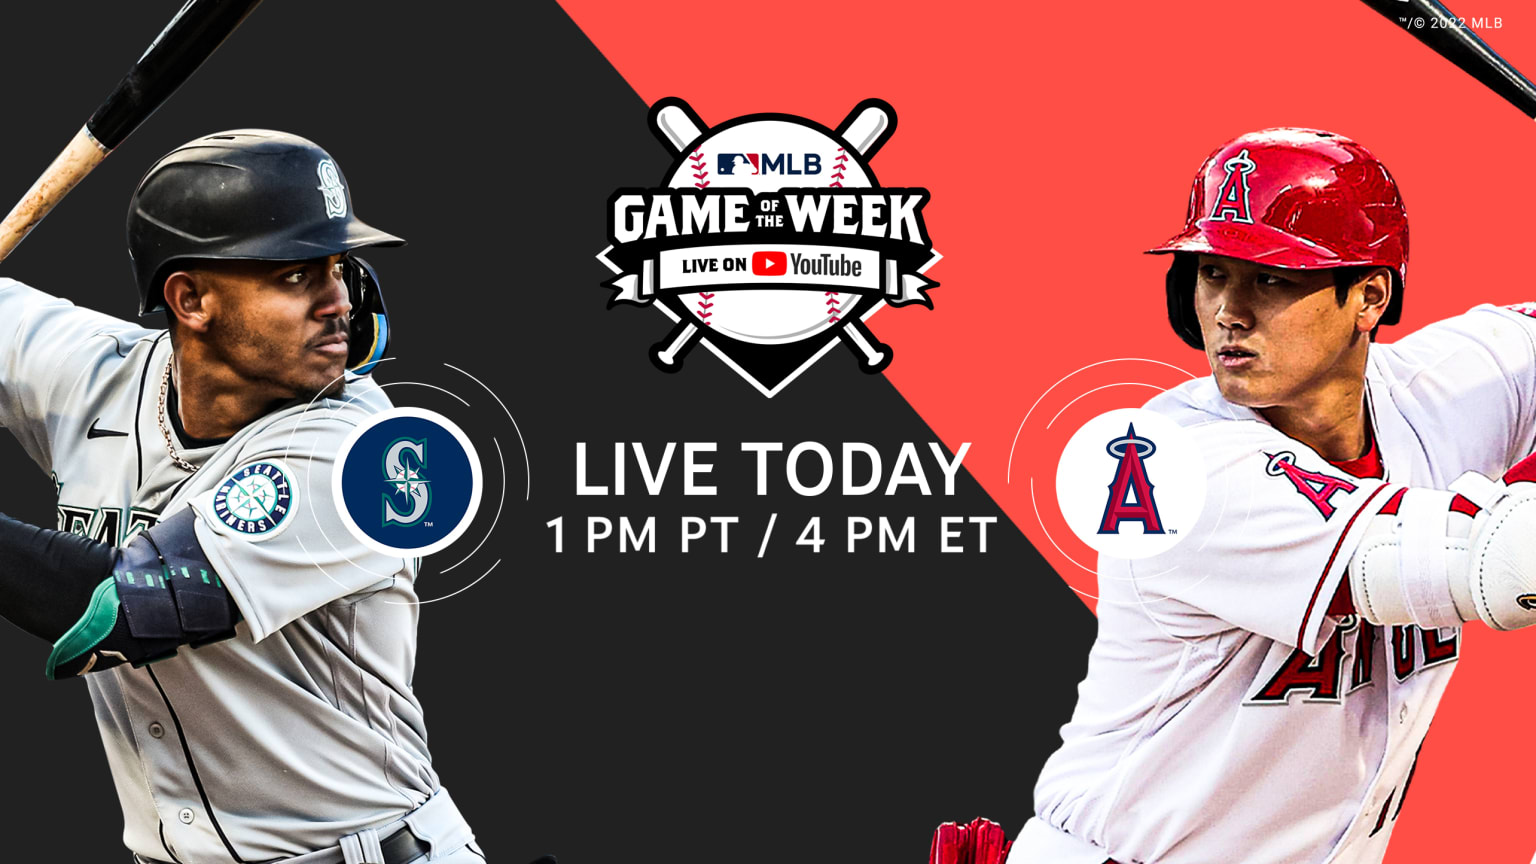 Mariners-Angels, free on YouTube Game of the Week